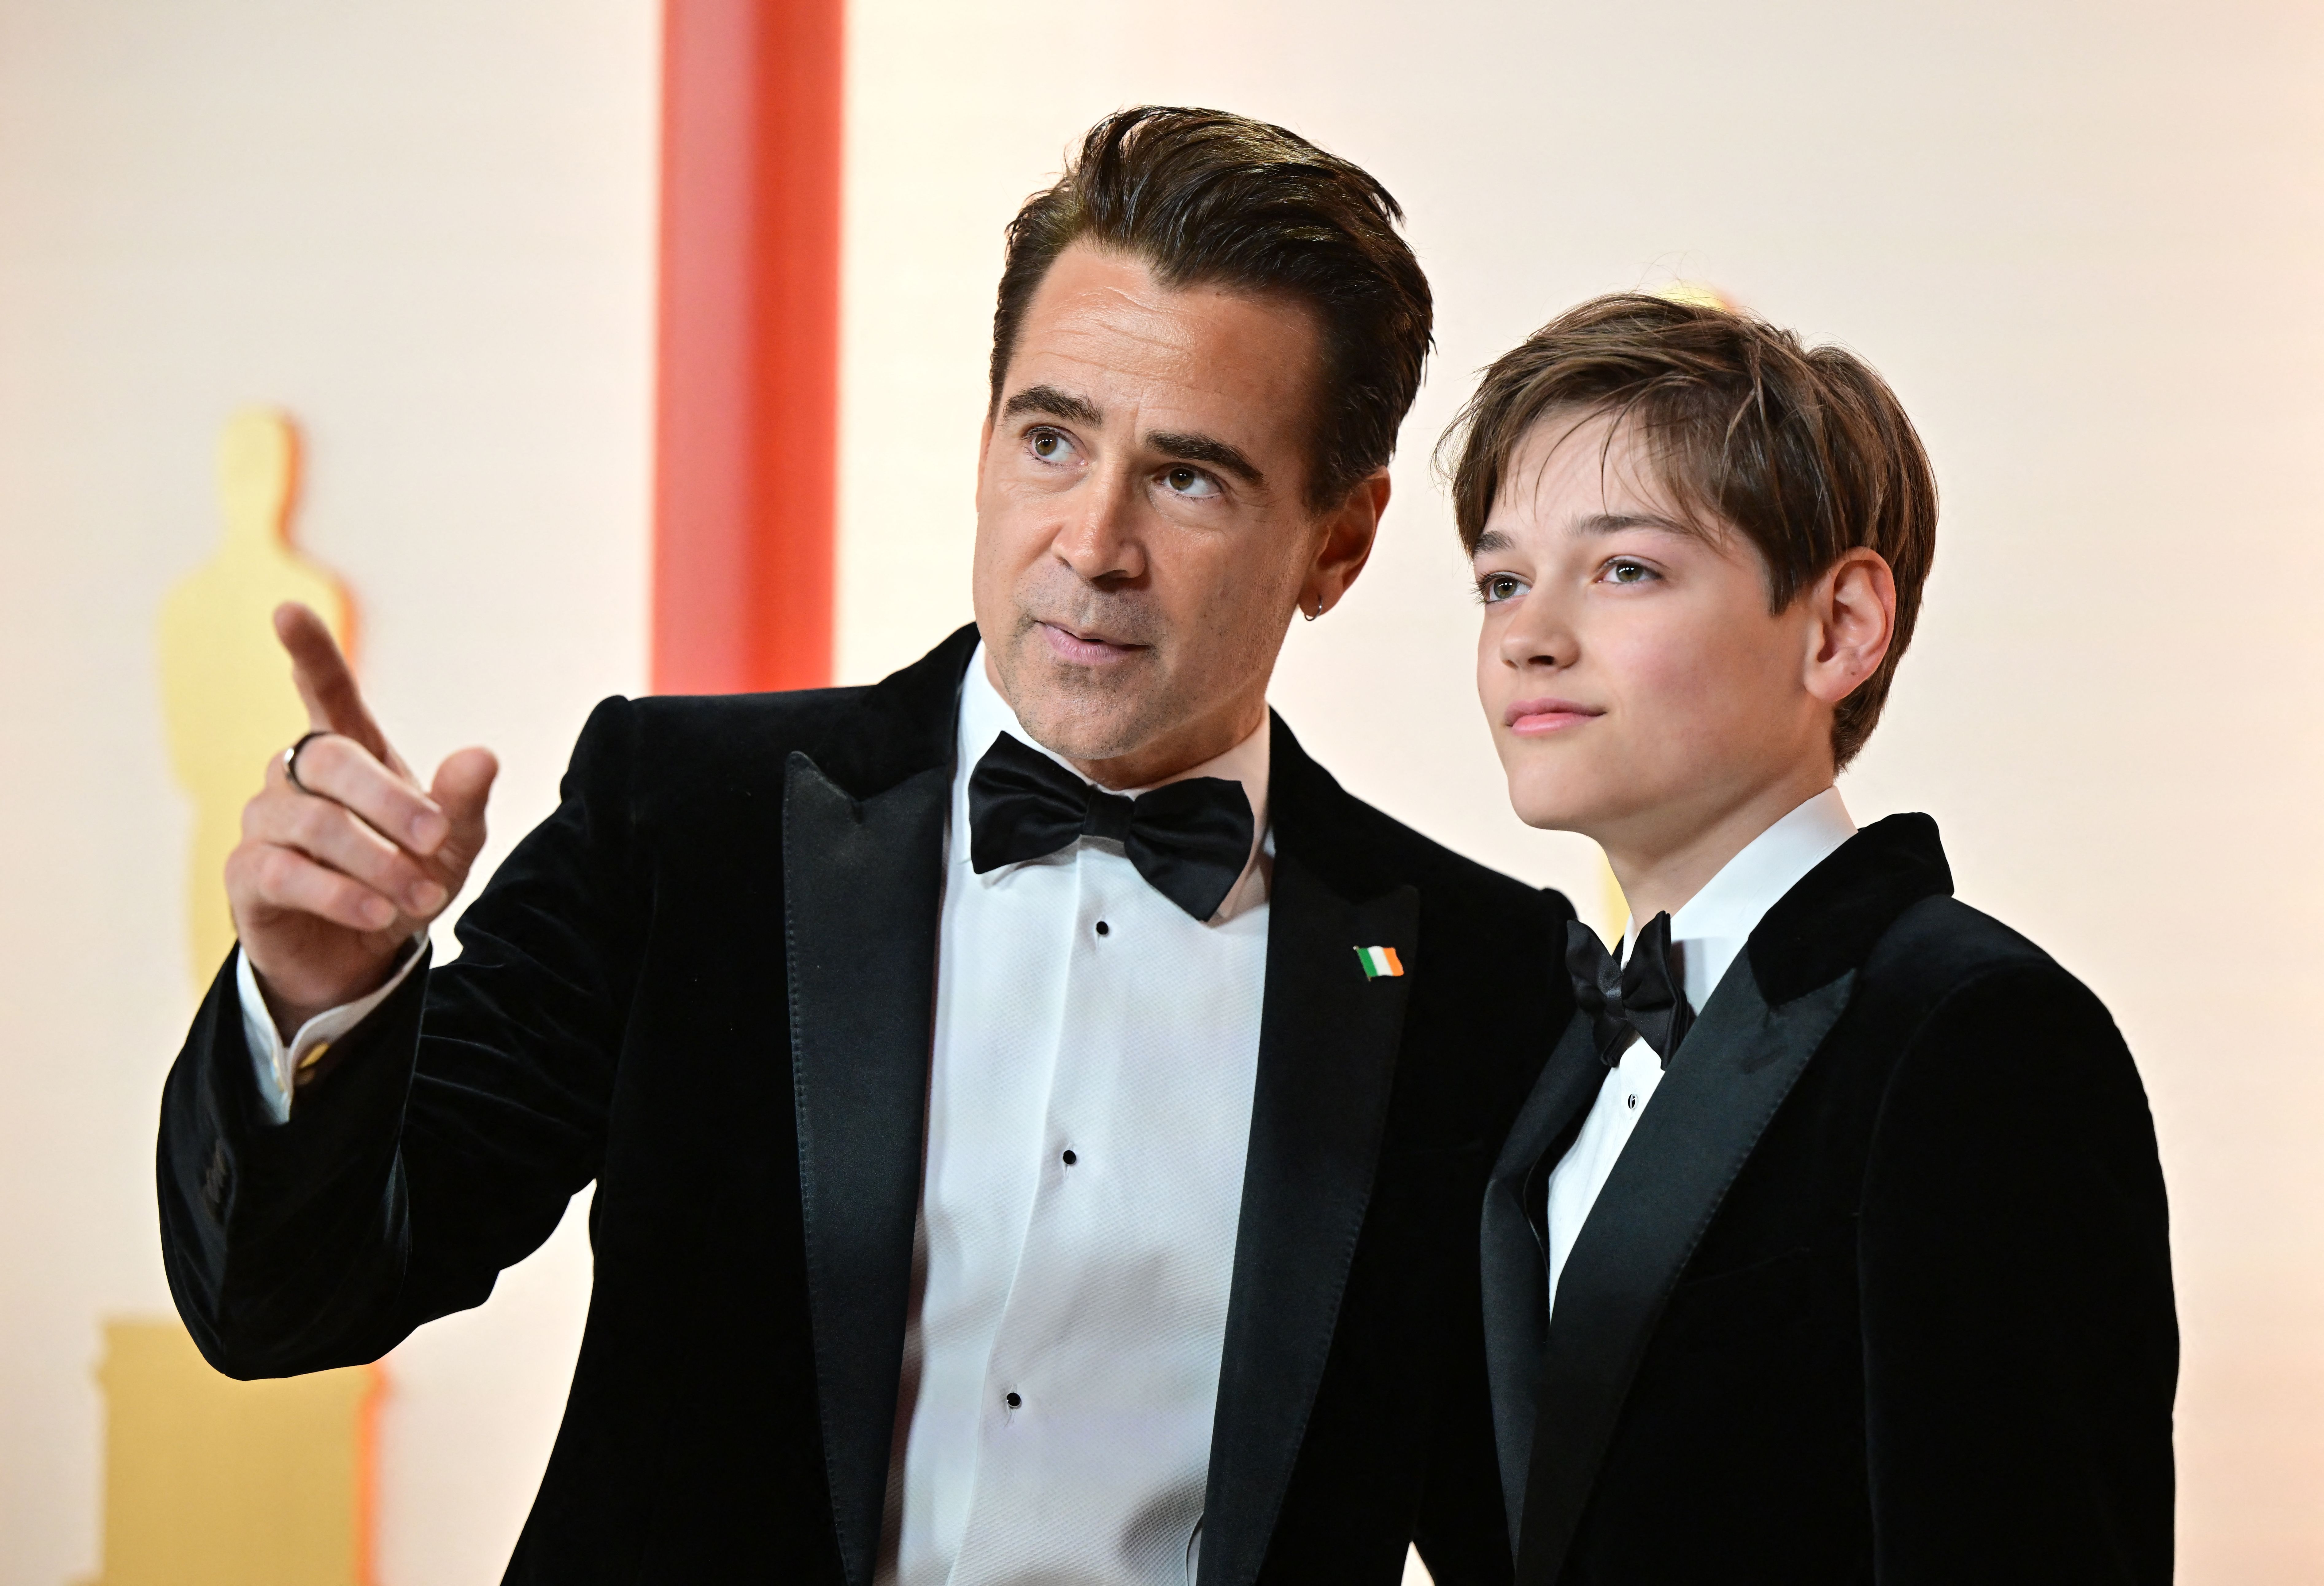 Colin Farrell and his son Henry at the Academy Awards in Hollywood in 2023 | Source: Getty Images